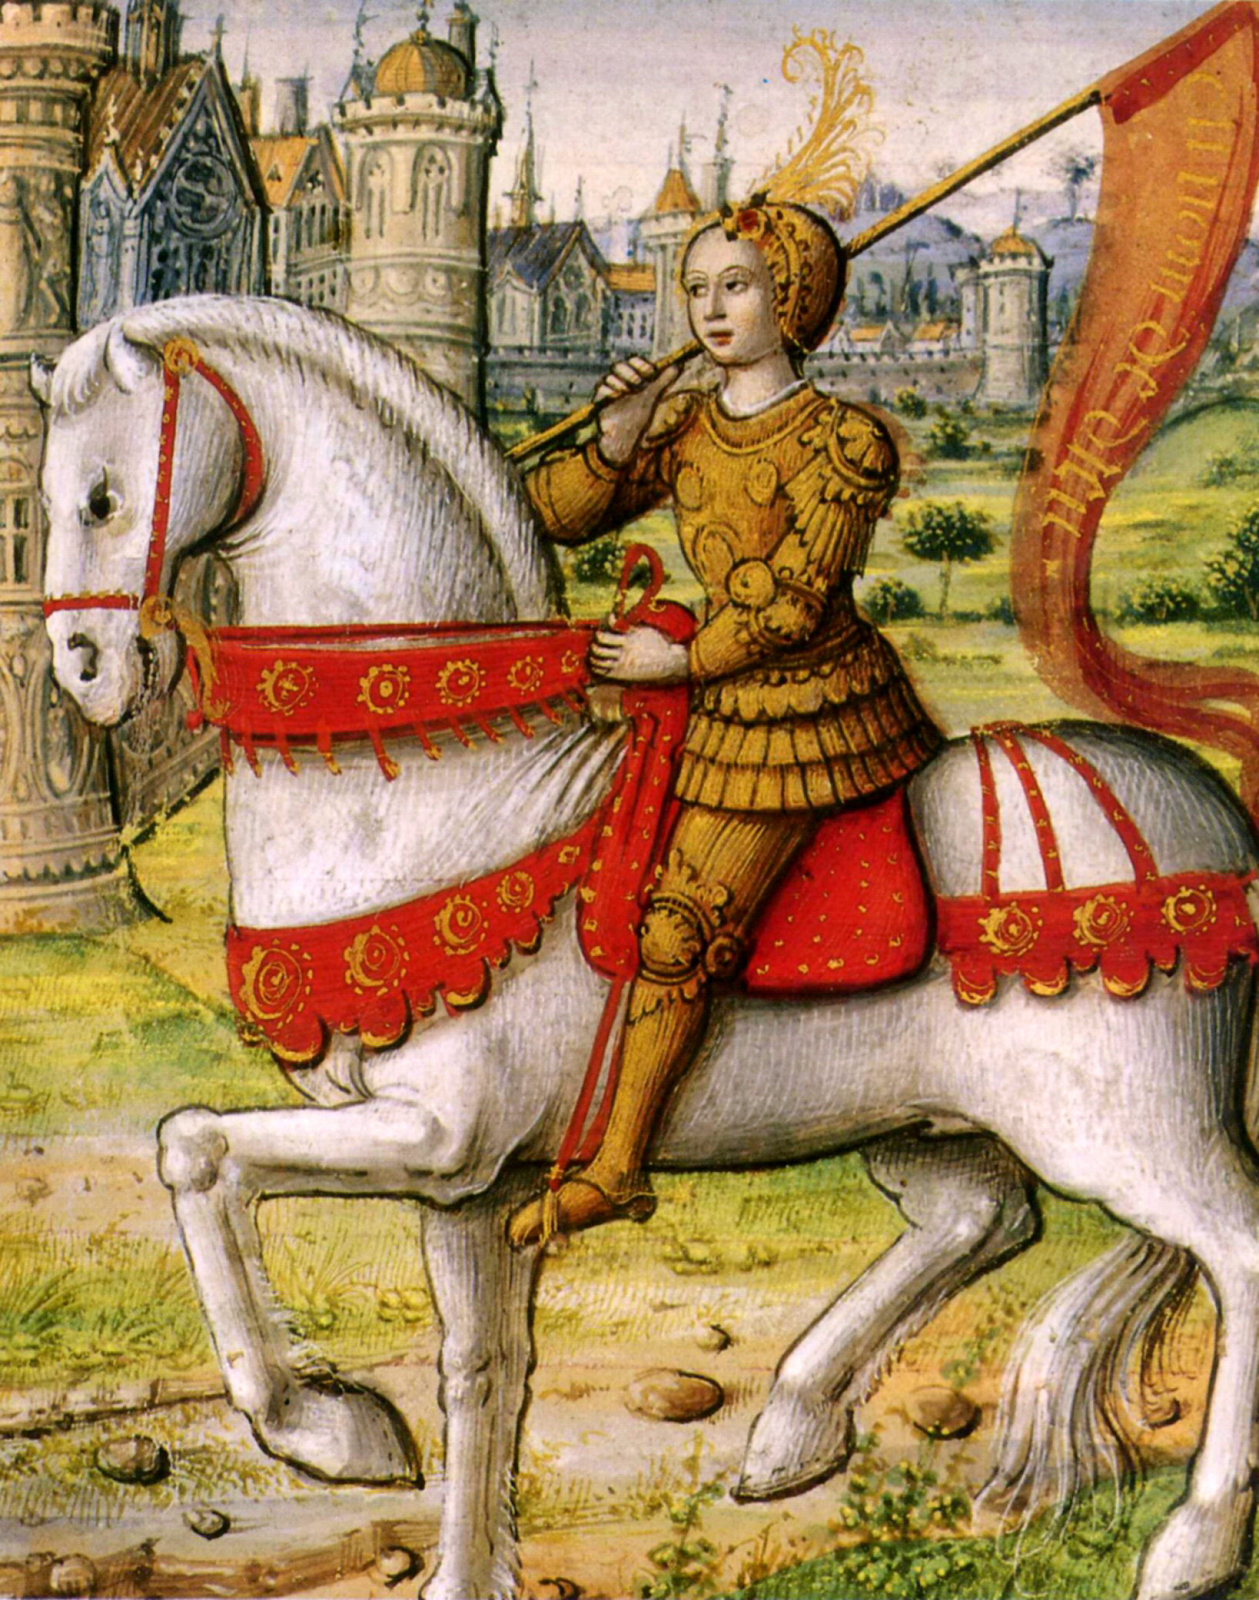 Jean of Arc on a white horse in armor.